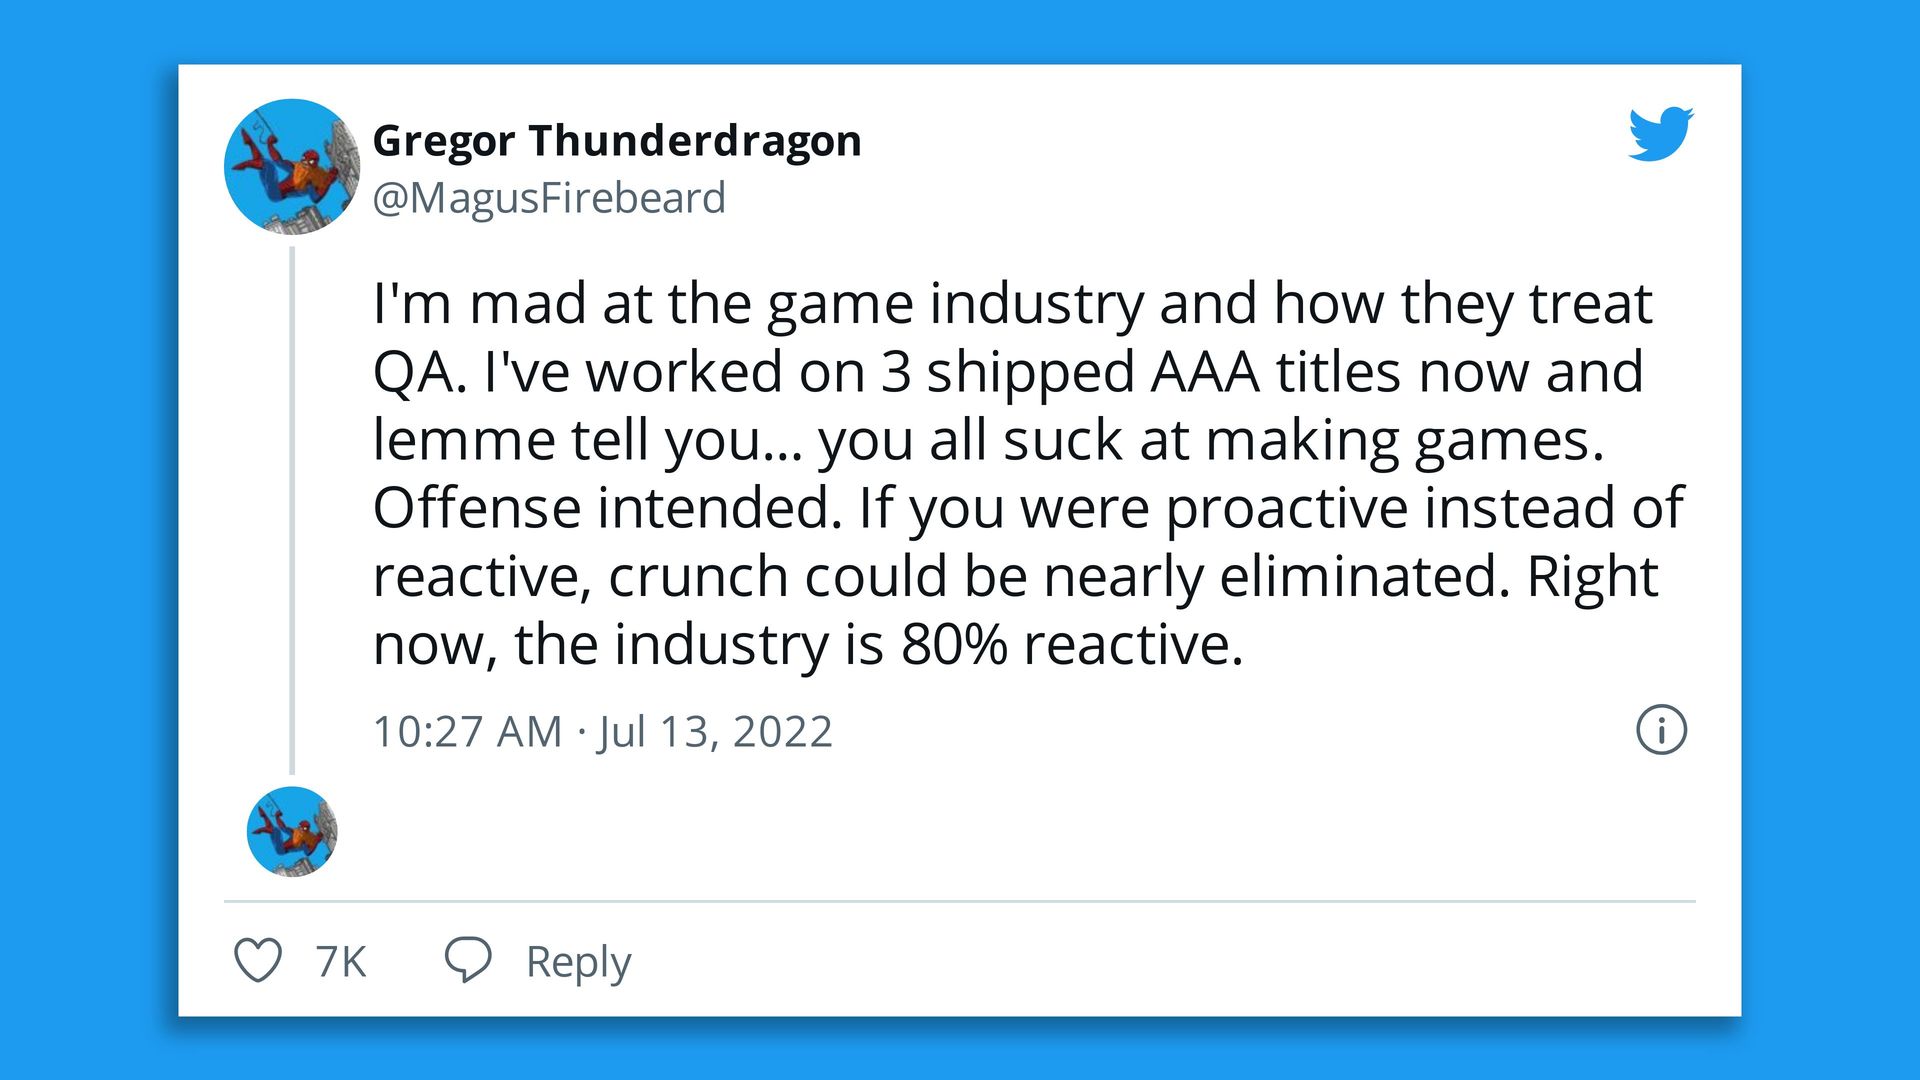 A tweet that says, in part: "I'm mad at the game industry and how they treat QA."